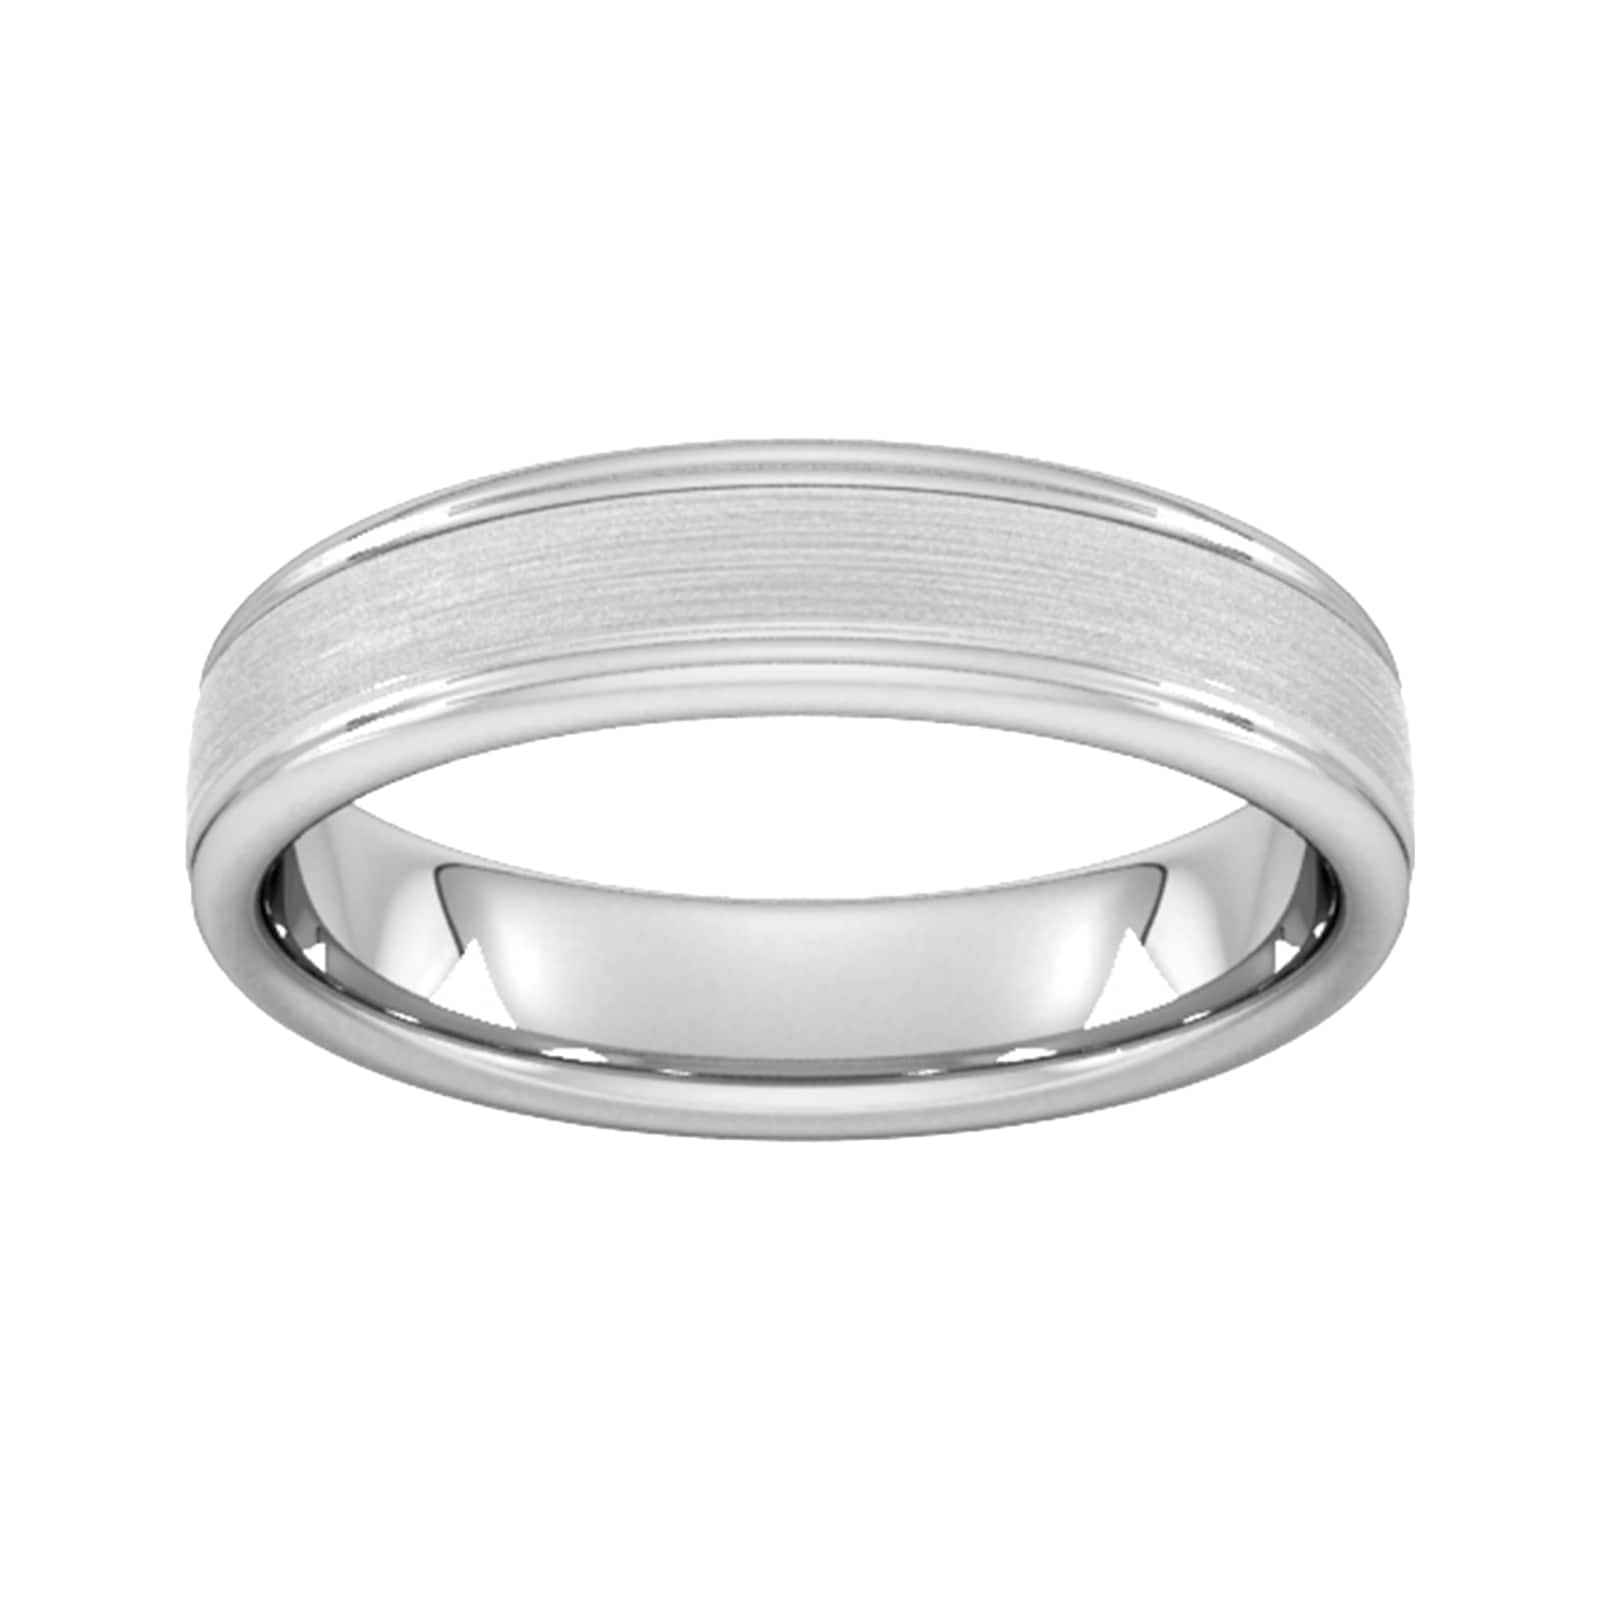 5mm Traditional Court Standard Matt Centre With Grooves Wedding Ring In 950 Palladium - Ring Size H